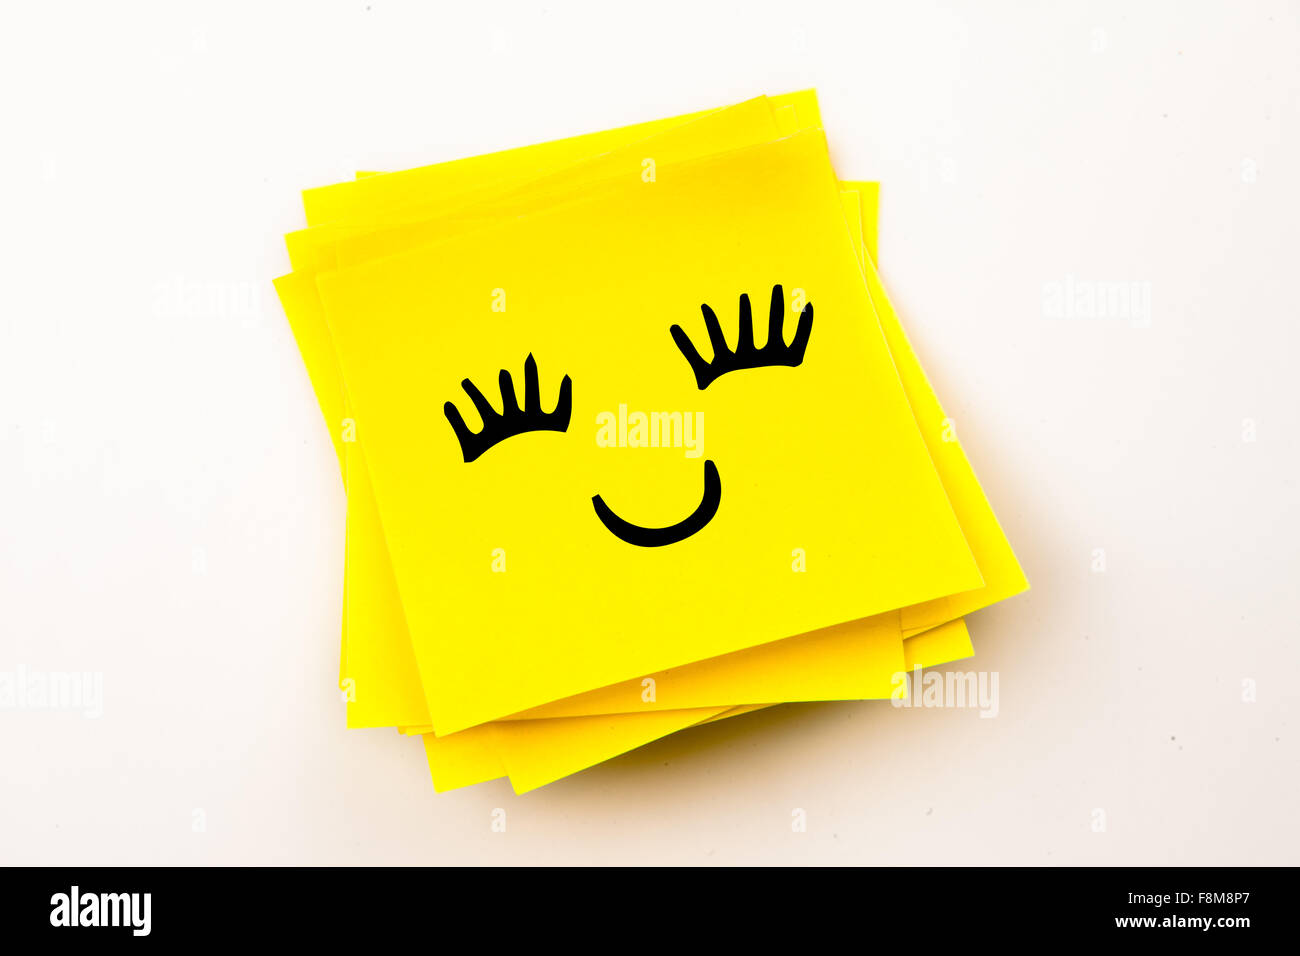 Office Sticky Notes Funny Faces Messages Stock Photo 1597482199